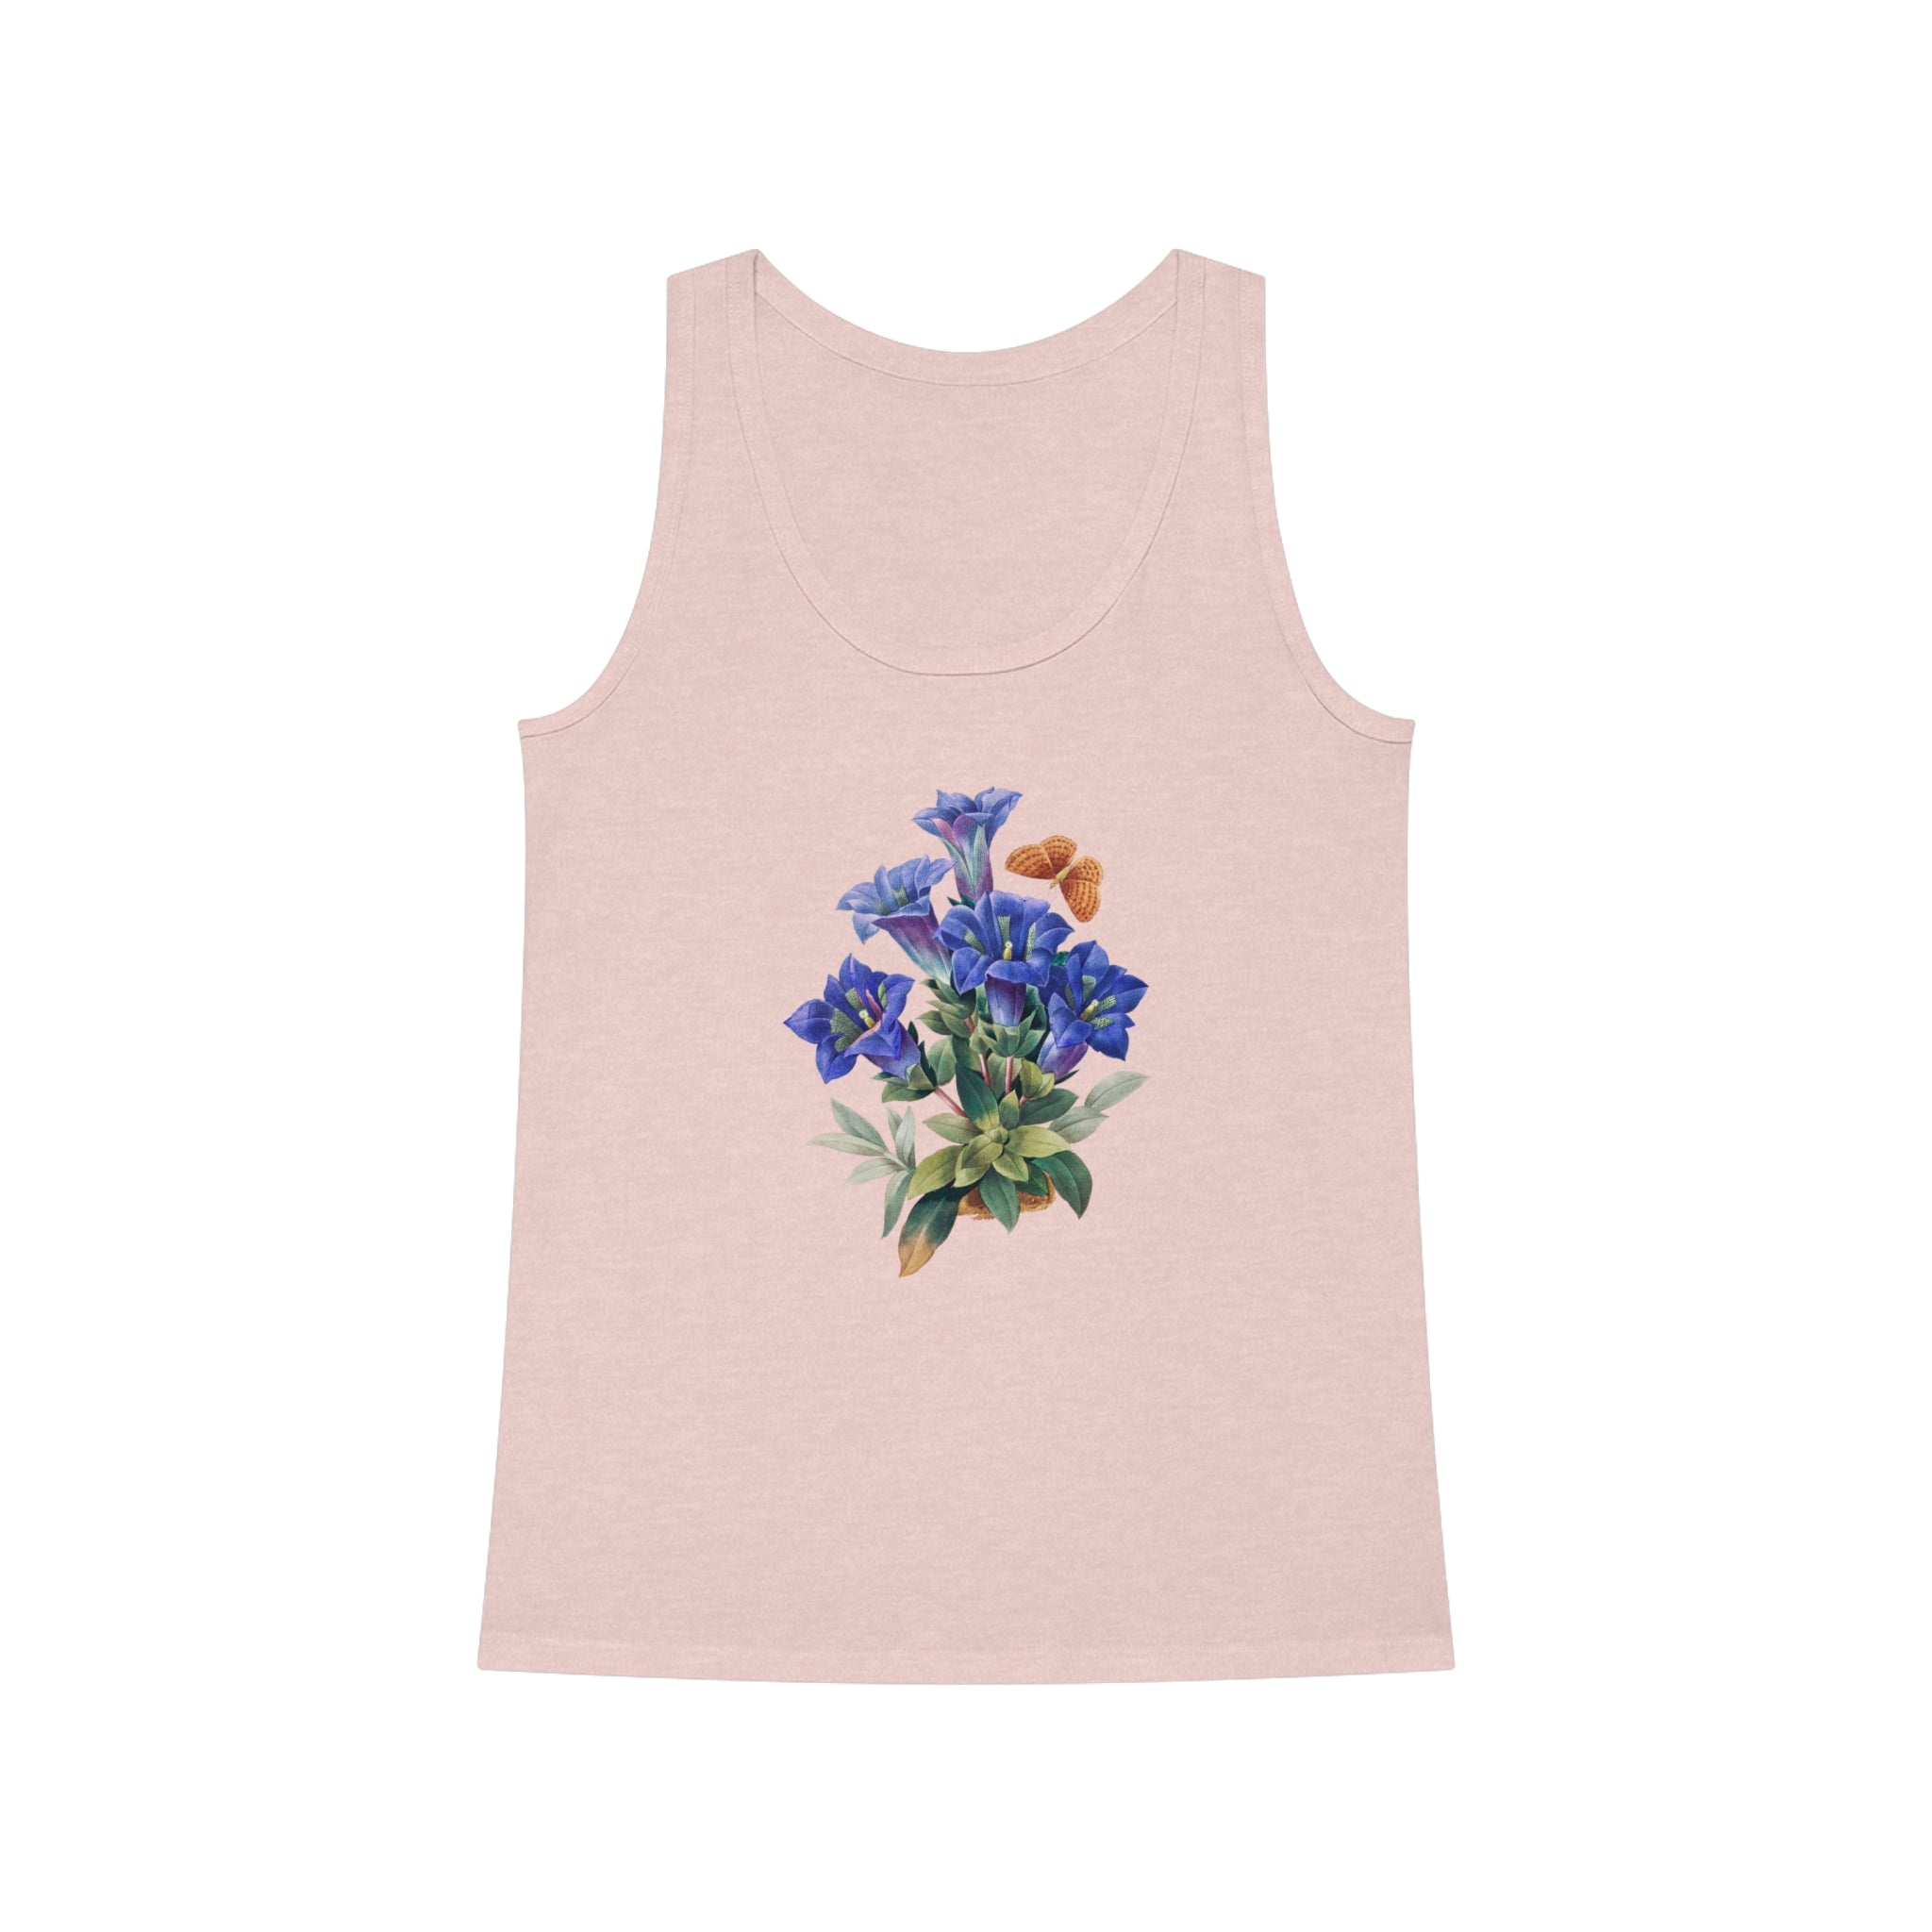 A Bouquet Tank Top with a beautiful bouquet of blue flowers, perfect for any occasion.